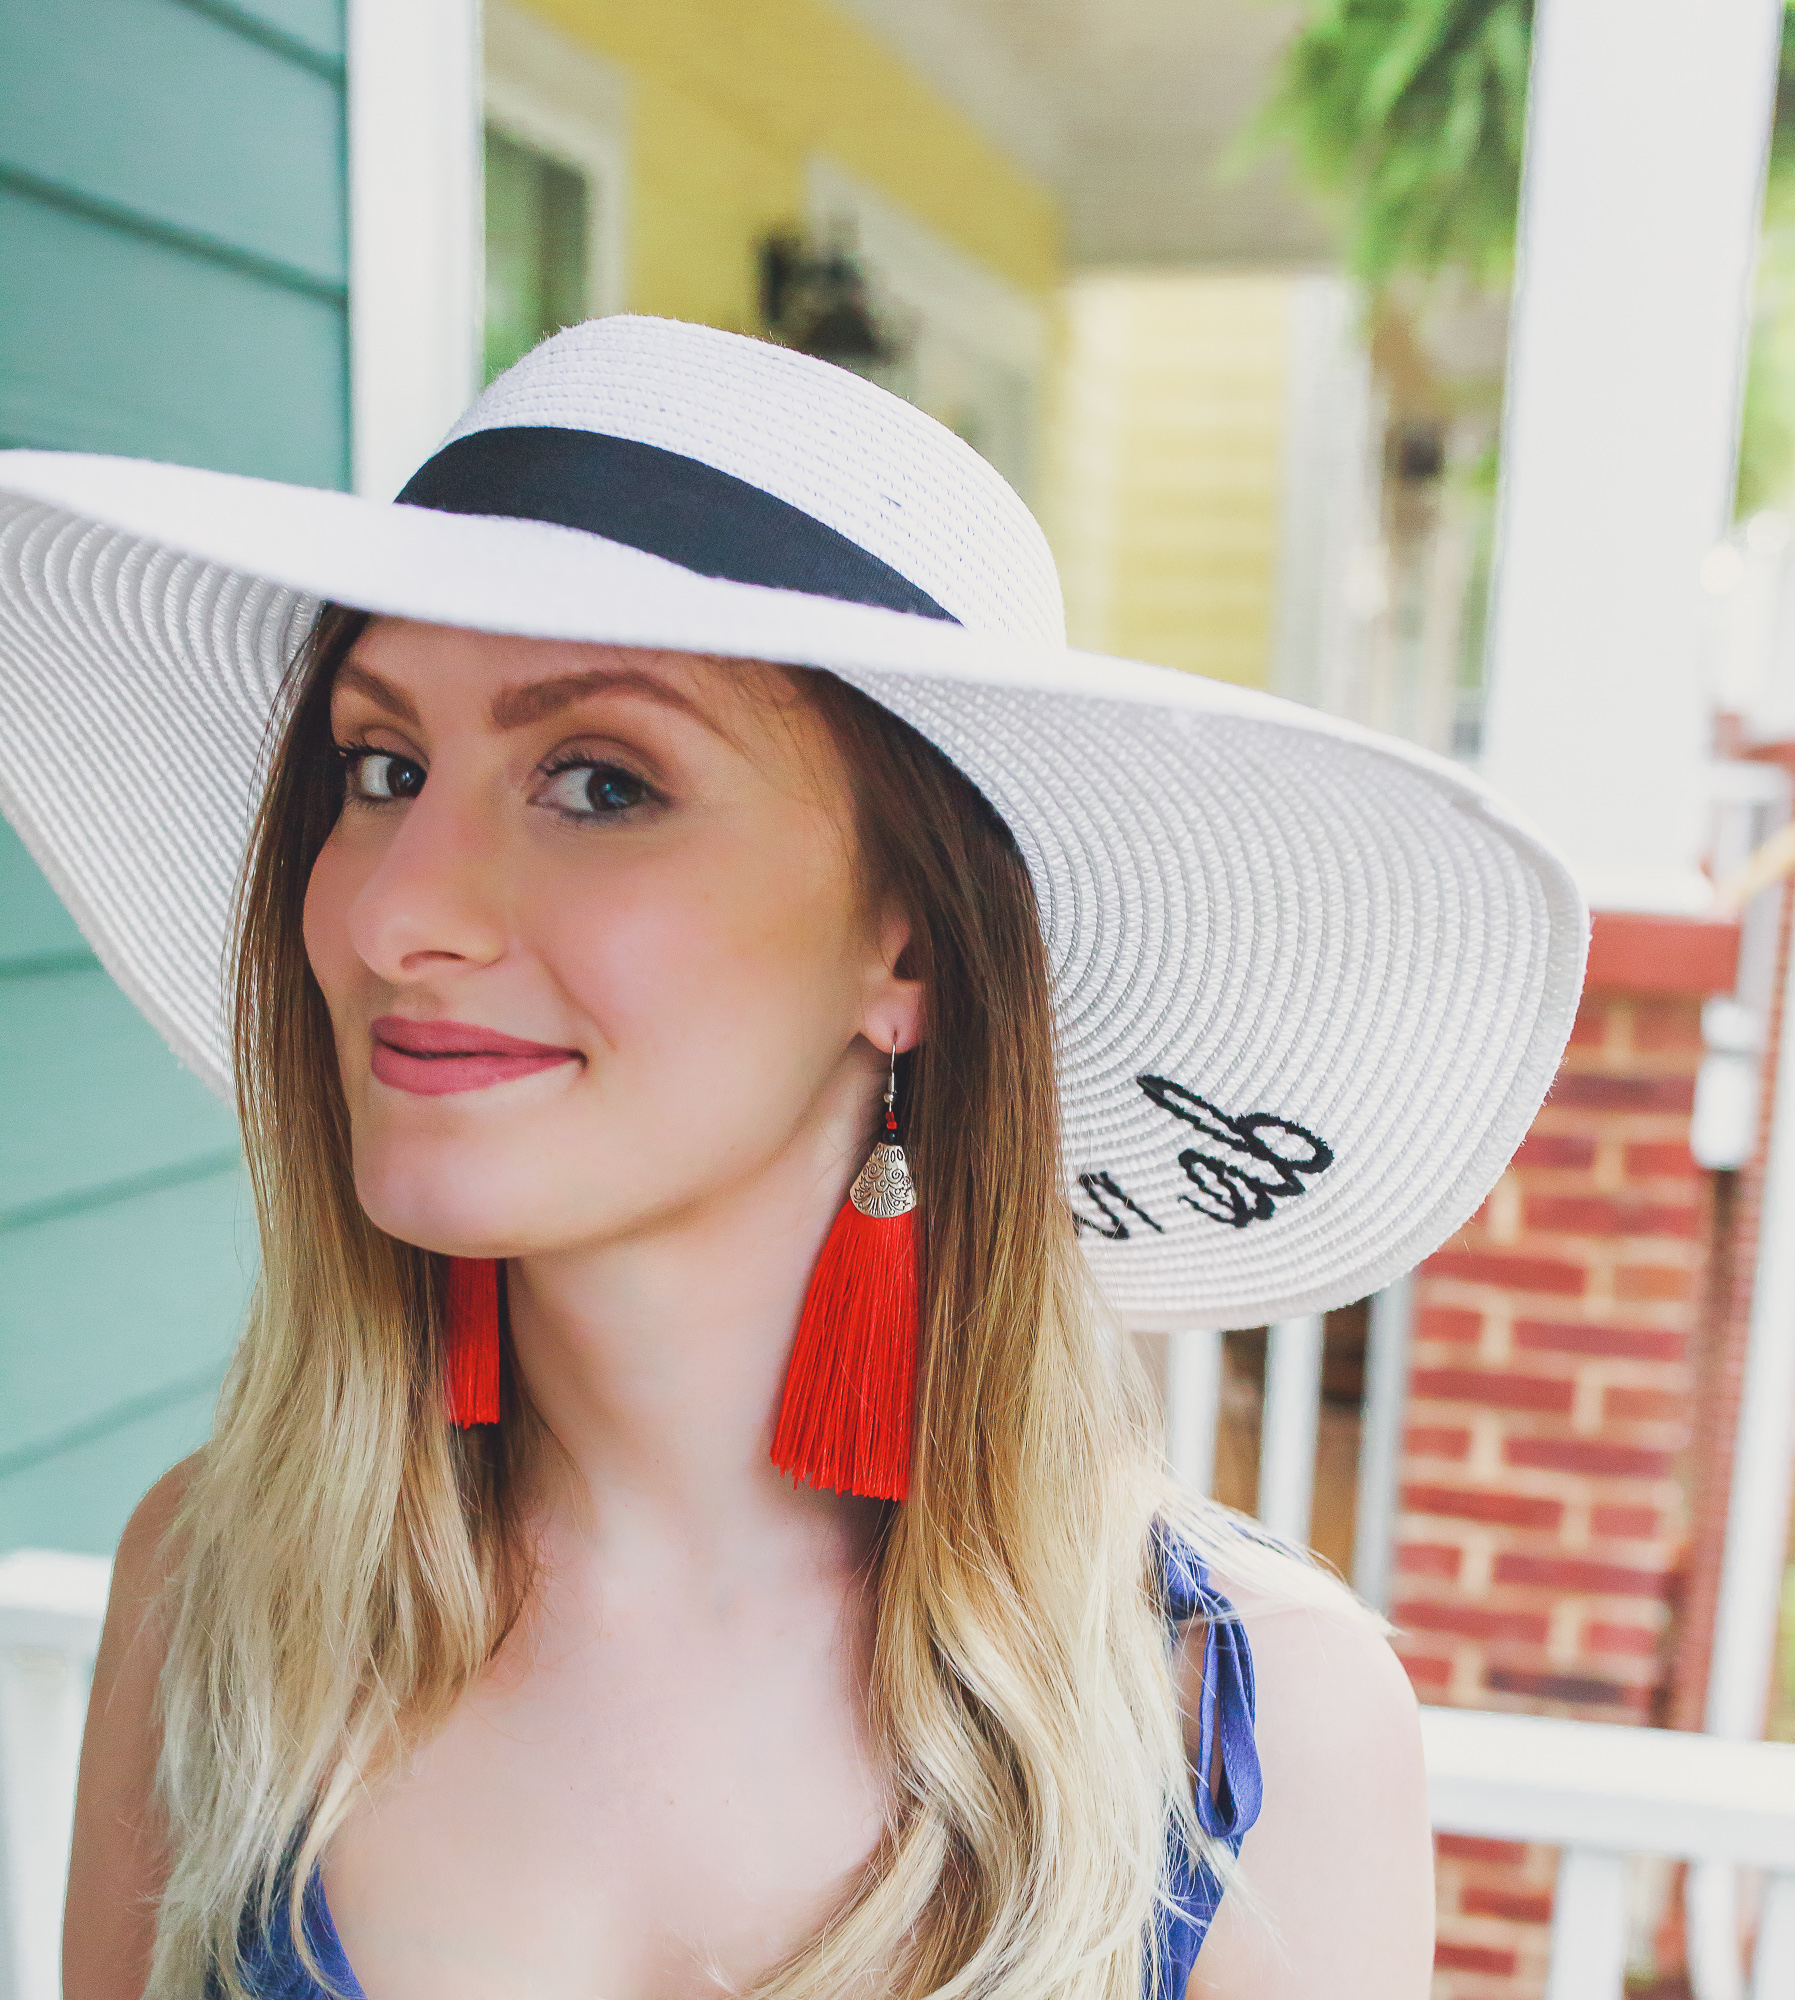 What to Wear in The 4th of July | Fashion and lifestyle blogger Jessica Linn showing some Independence Day outfit inspiration and a cute red white and blue outfit in collaboration with local North Carolina business, Southern Chique Boutique. Navy blue spaghetti strap dress from Southern Chique Boutique, red tassel earrings and "Do Not Disturb" sun hat from Copper Bloom, purse by Universal Thread from Target, and sandals from Ross.